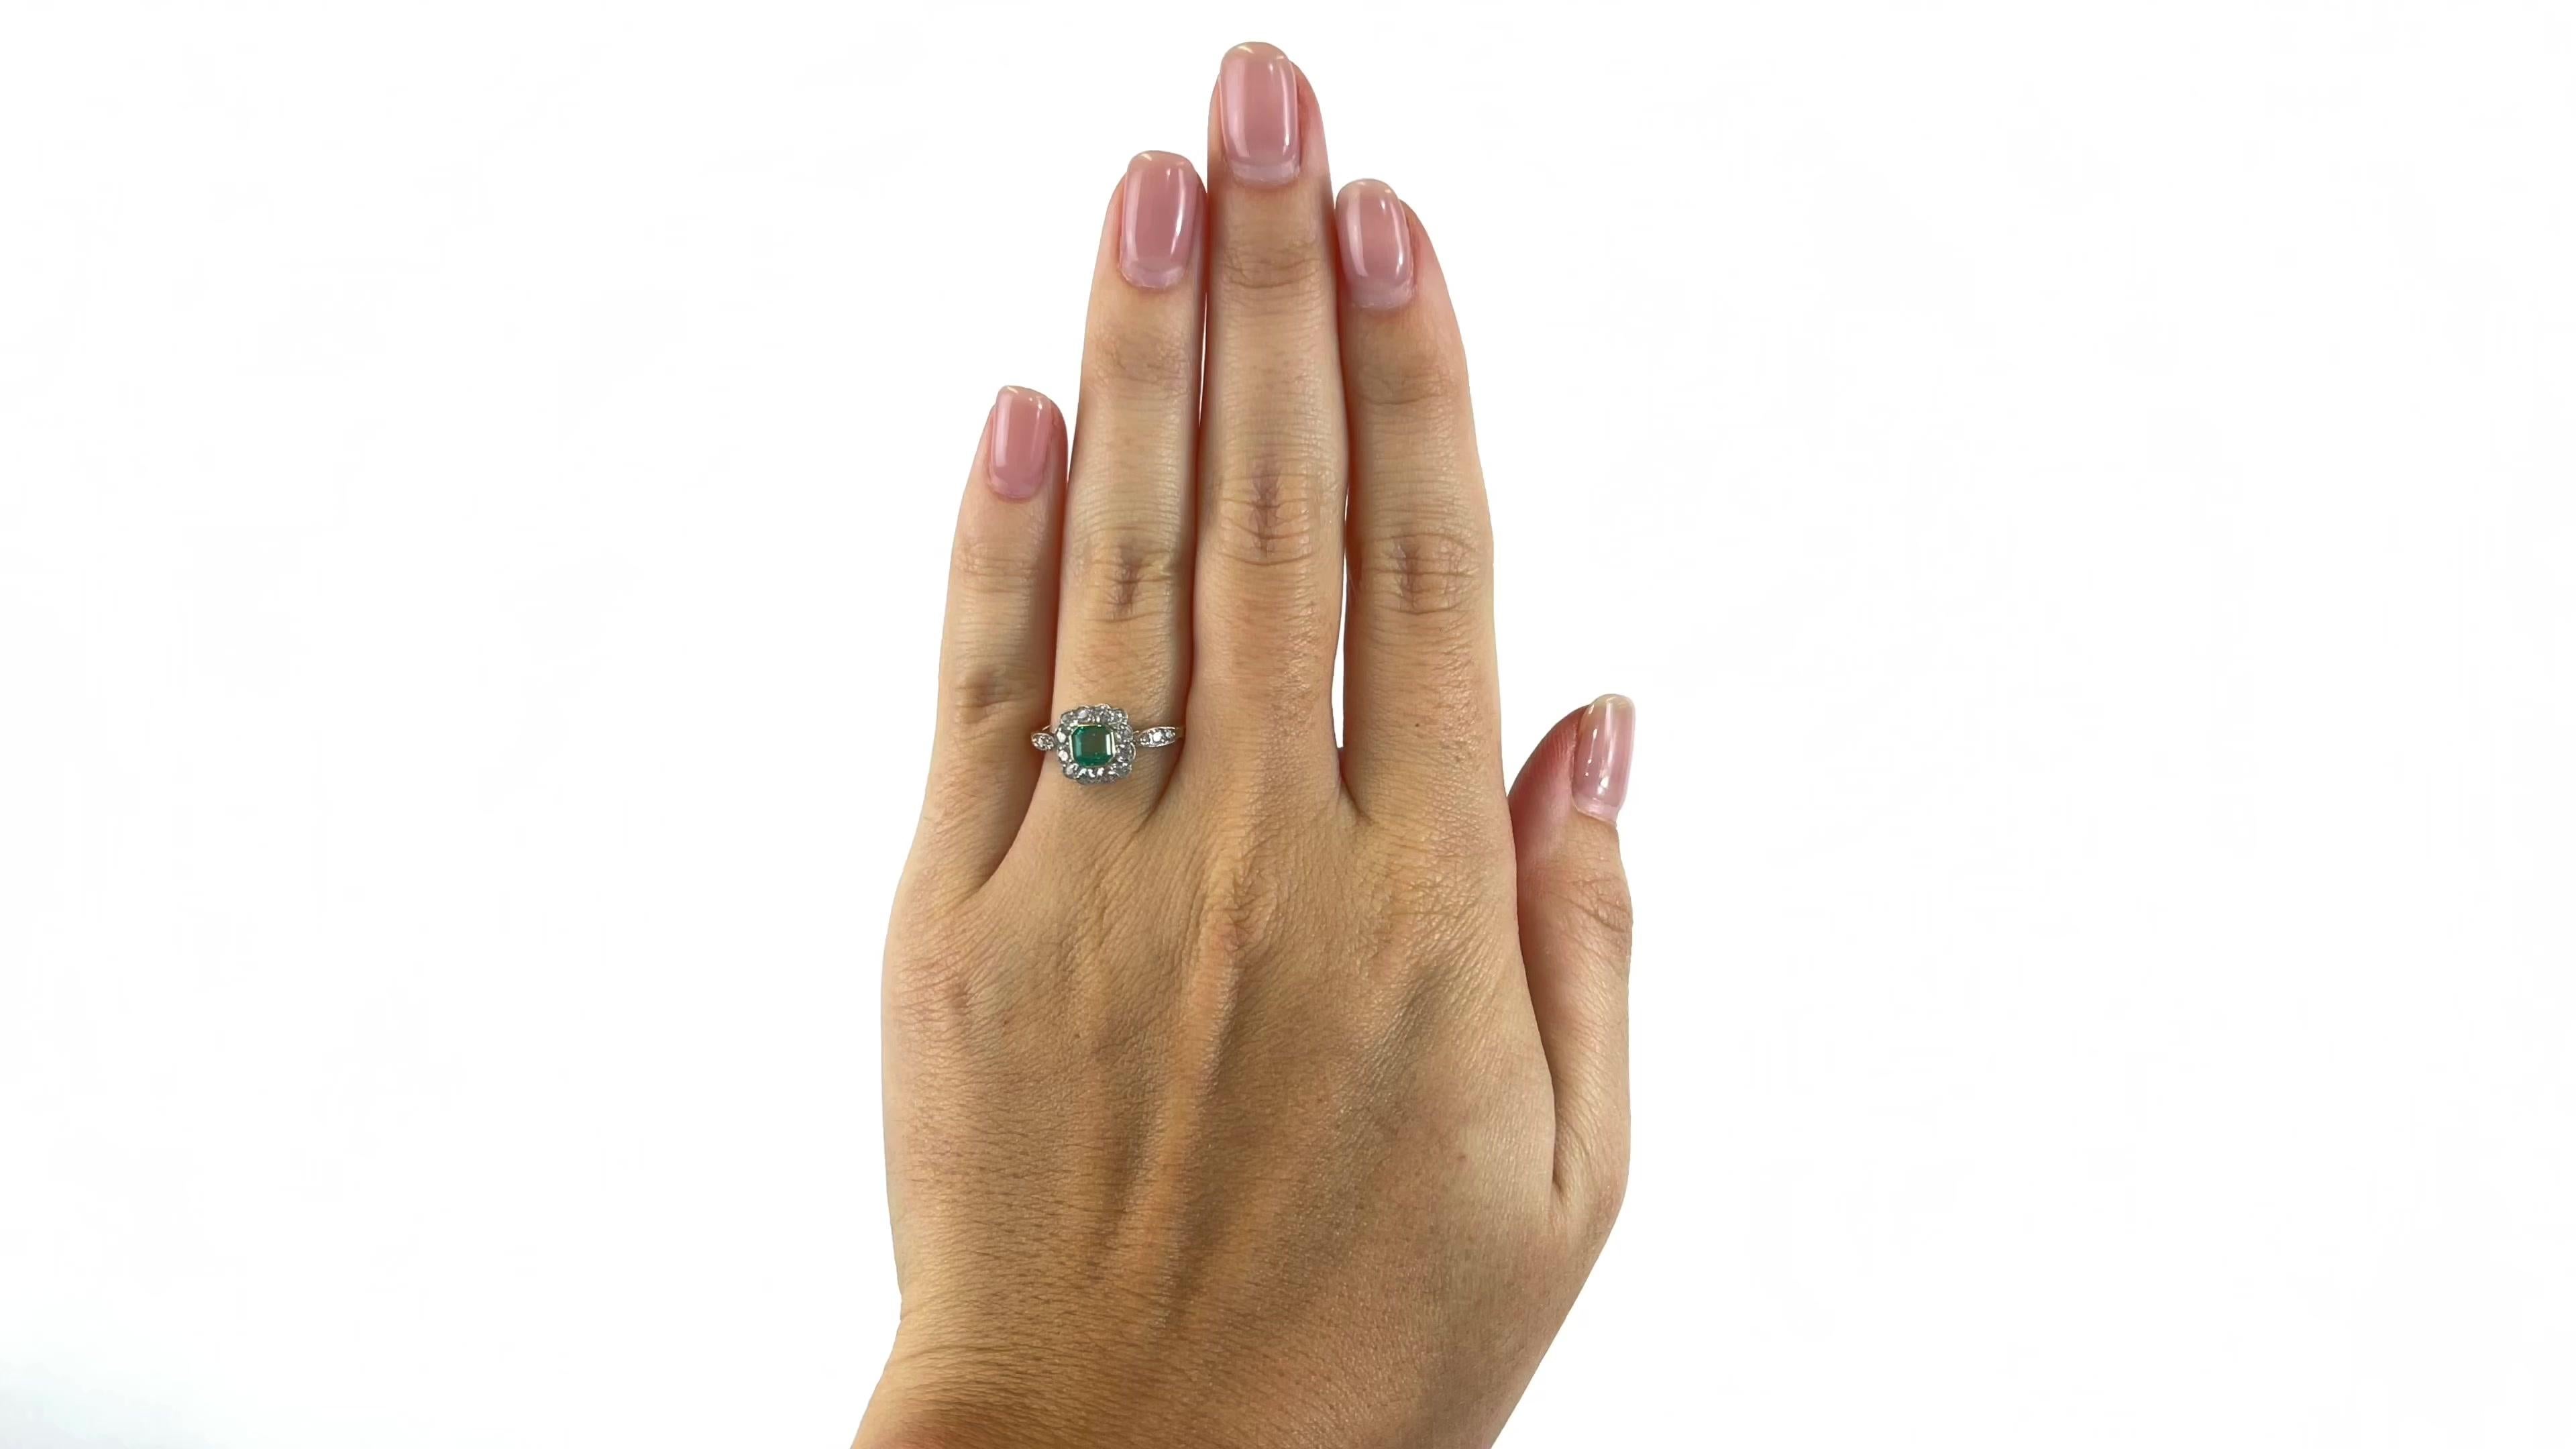 One Antique Inspired Emerald Diamond 18K Gold Ring. Featuring one 0.52 carat step cut emerald. Accented by 18 old European cut diamonds with a total weight of approximately 0.58 carats, graded G color, VS-SI clarity. Crafted in 18 karat yellow gold